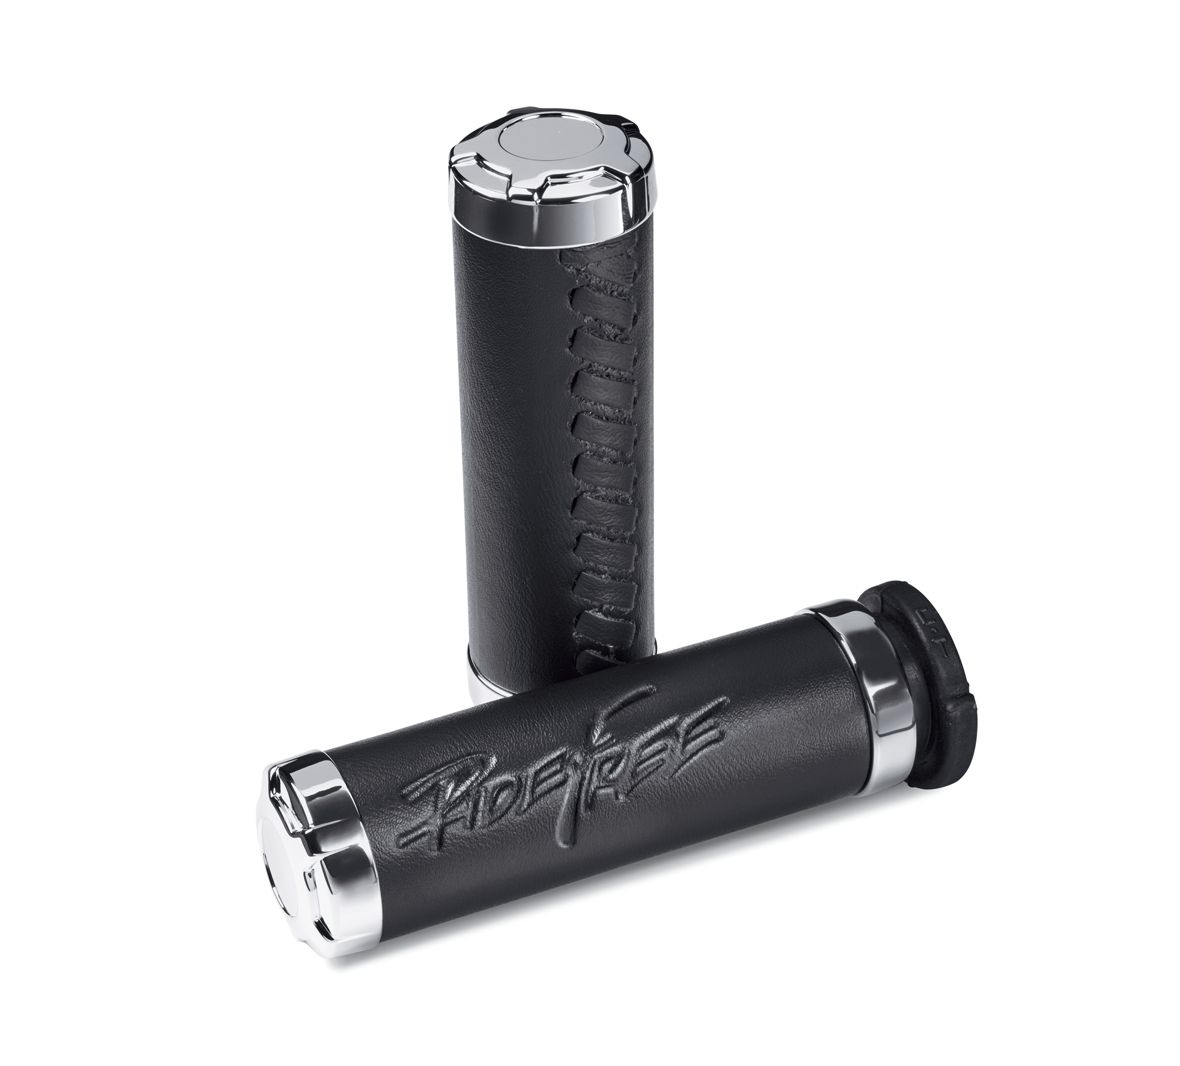 Harley-Davidson® Ride Free Hand Grips - 56100378.  This collection celebrates our liberty to enjoy the freedom of the open road, and calls us all to explore, discover and unite with our love of motorcycling. Inspired by Willie G® Davidson’s famous phrase, this collection continues in that tradition.